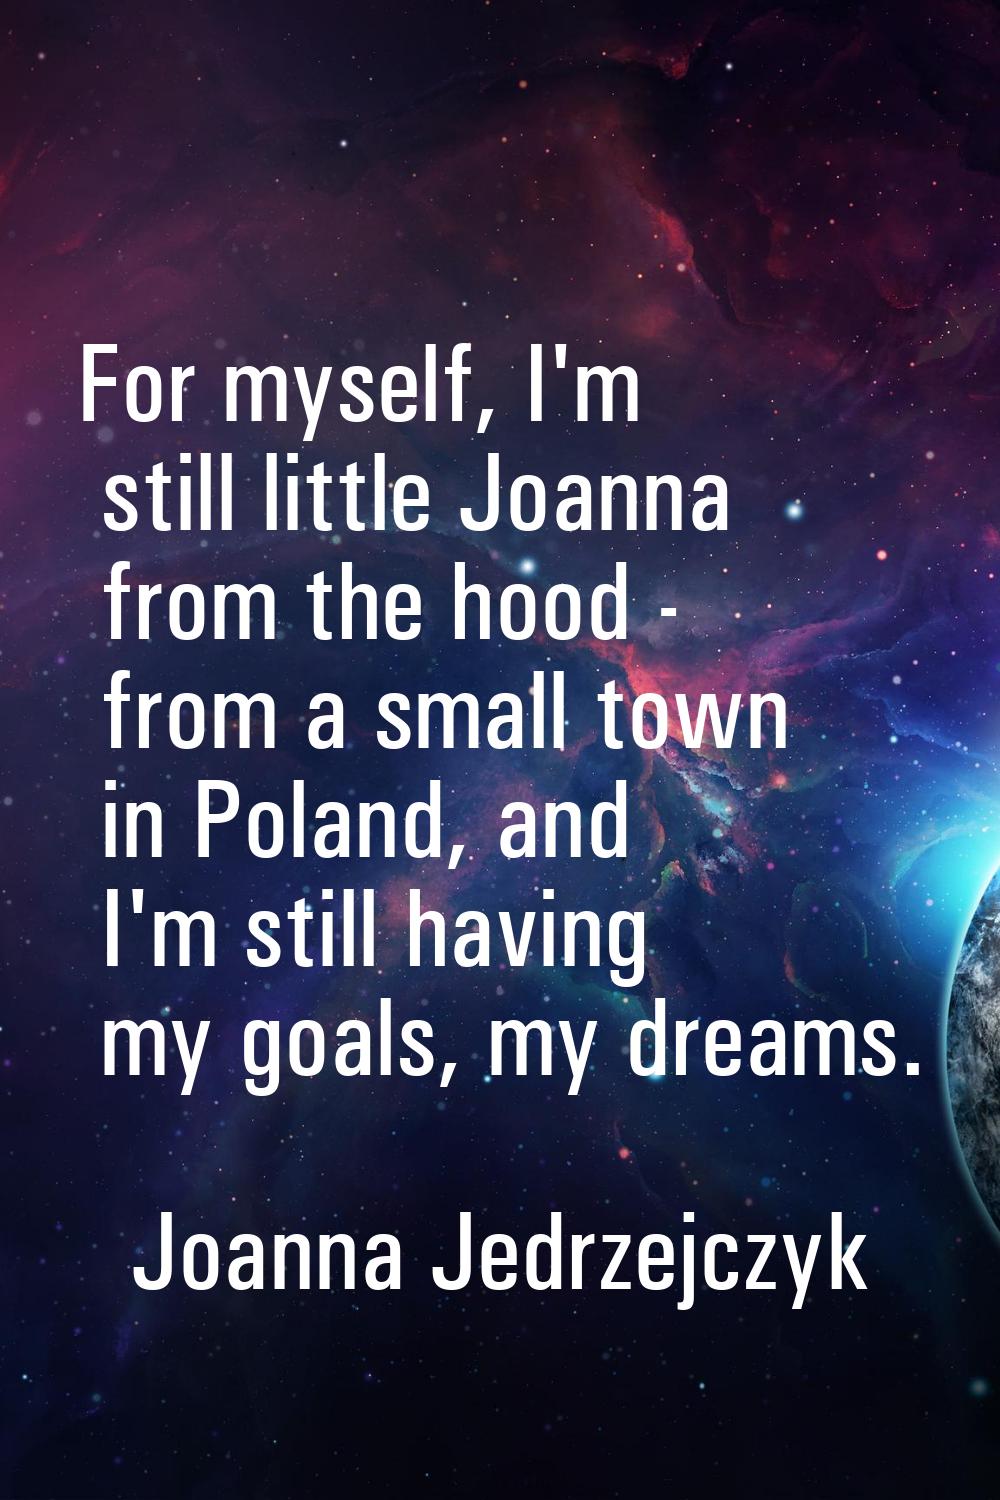 For myself, I'm still little Joanna from the hood - from a small town in Poland, and I'm still havi